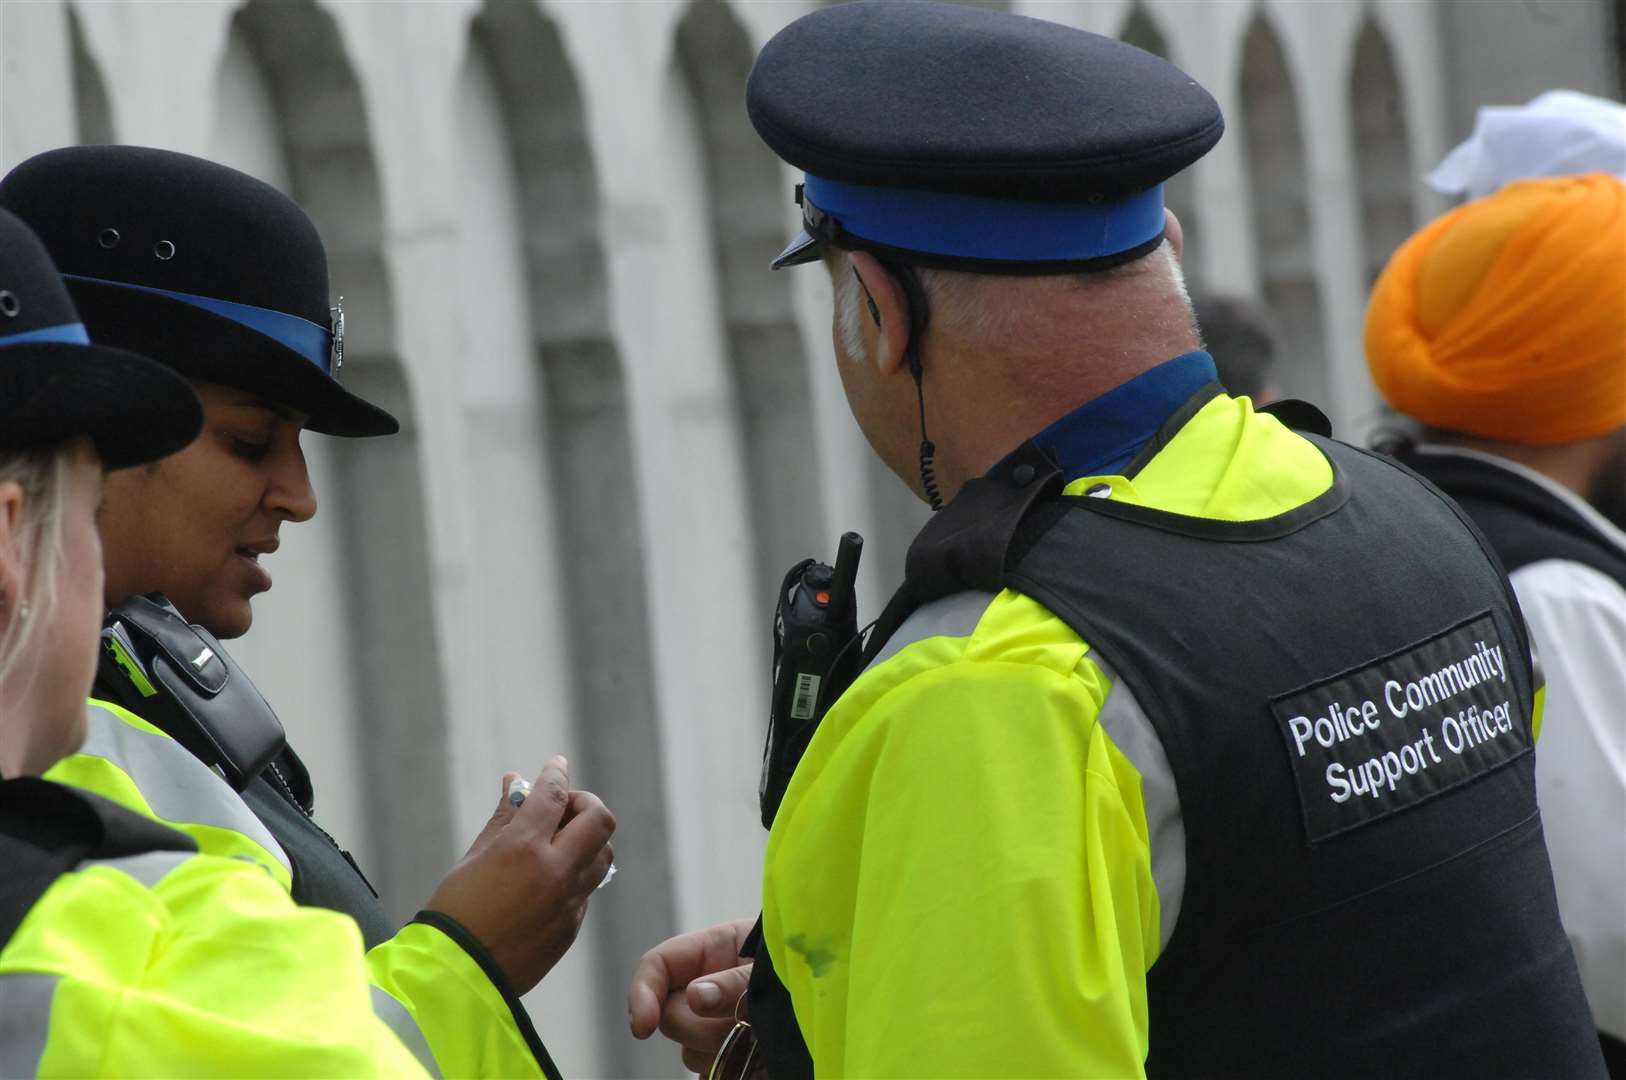 There could be reduction in the number of PCSOs as part of the cost-cutting measures. Stock picture: Nick Johnson